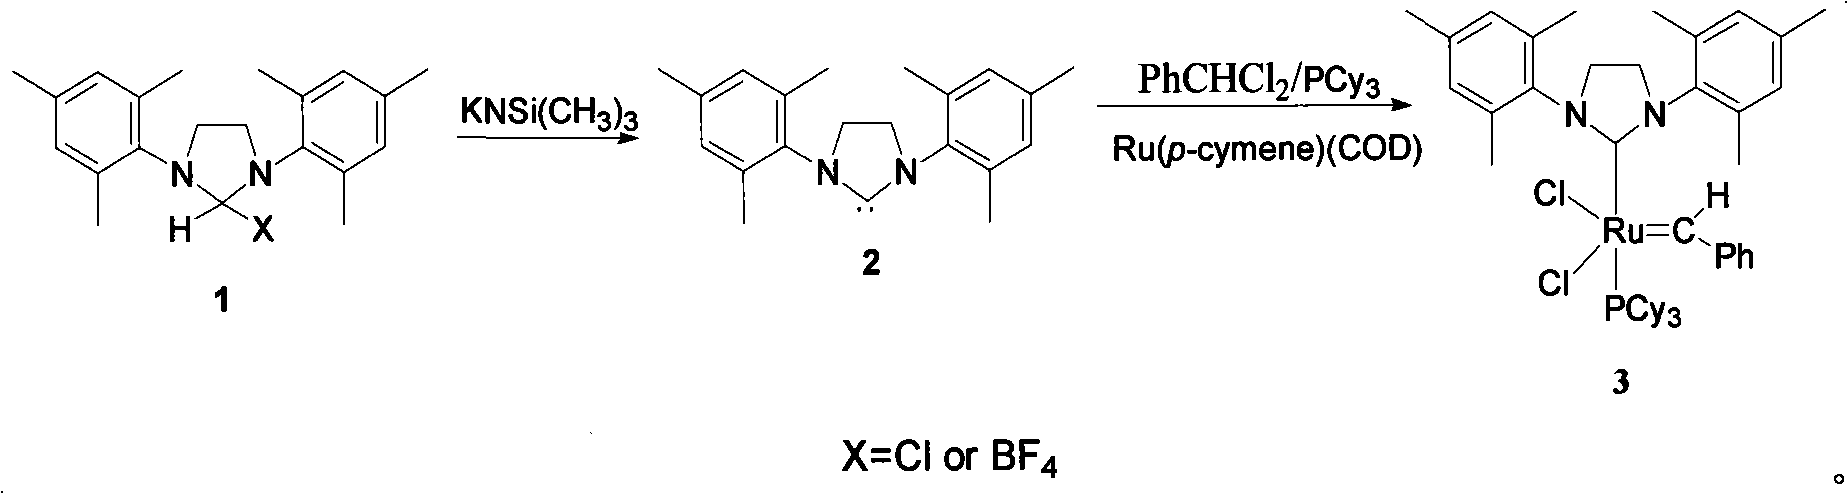 Method for synthesizing second generation Grubbs catalyst